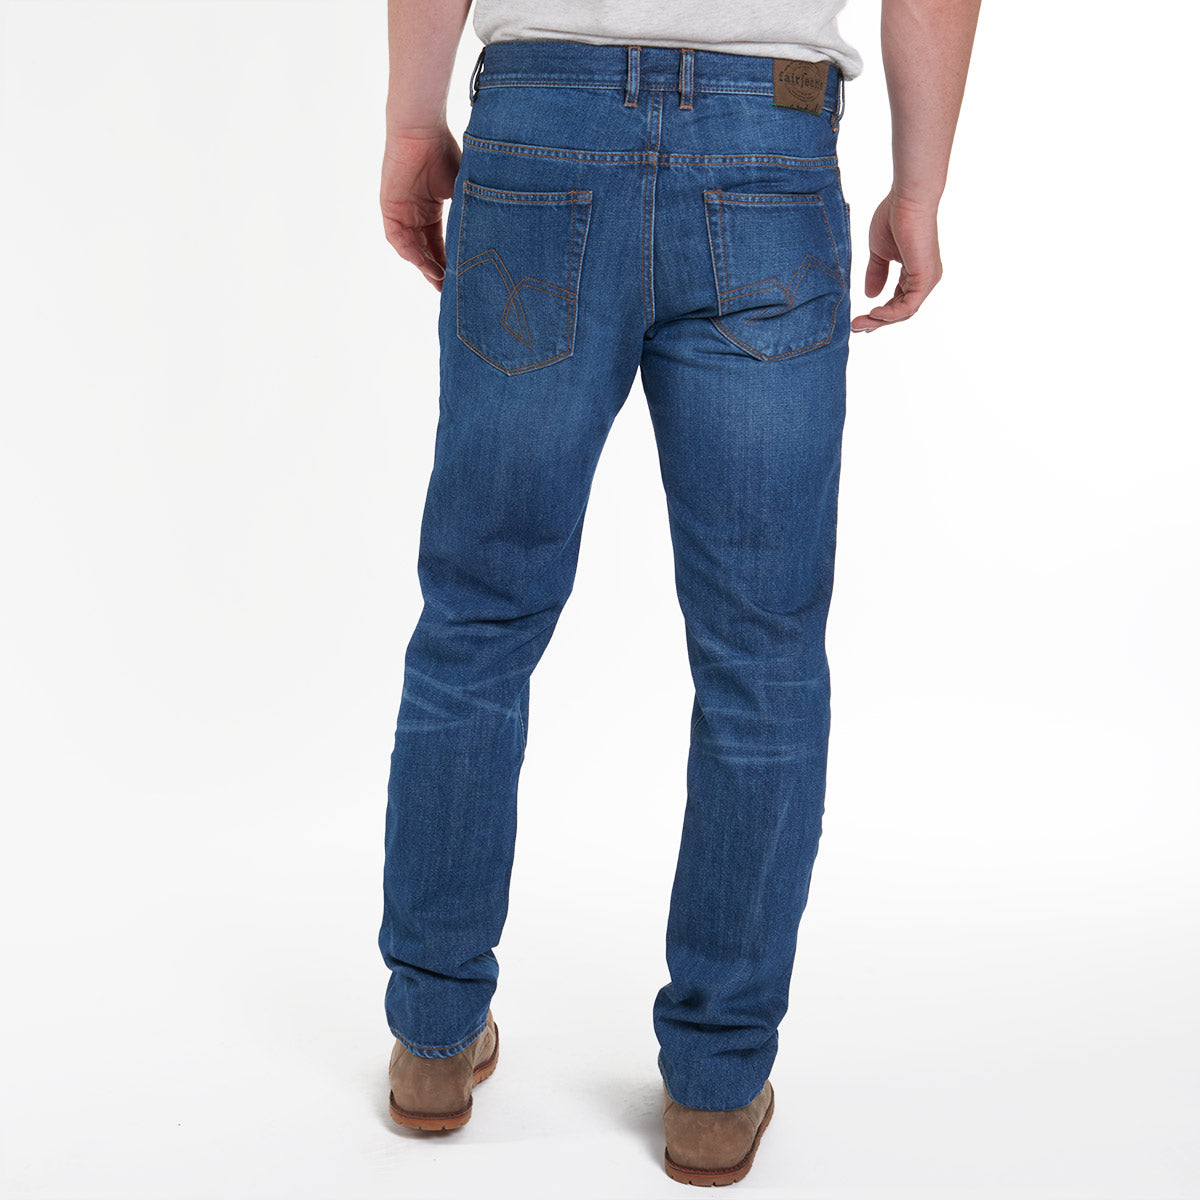 Jeans Herren relaxed Fairjeans washed blue